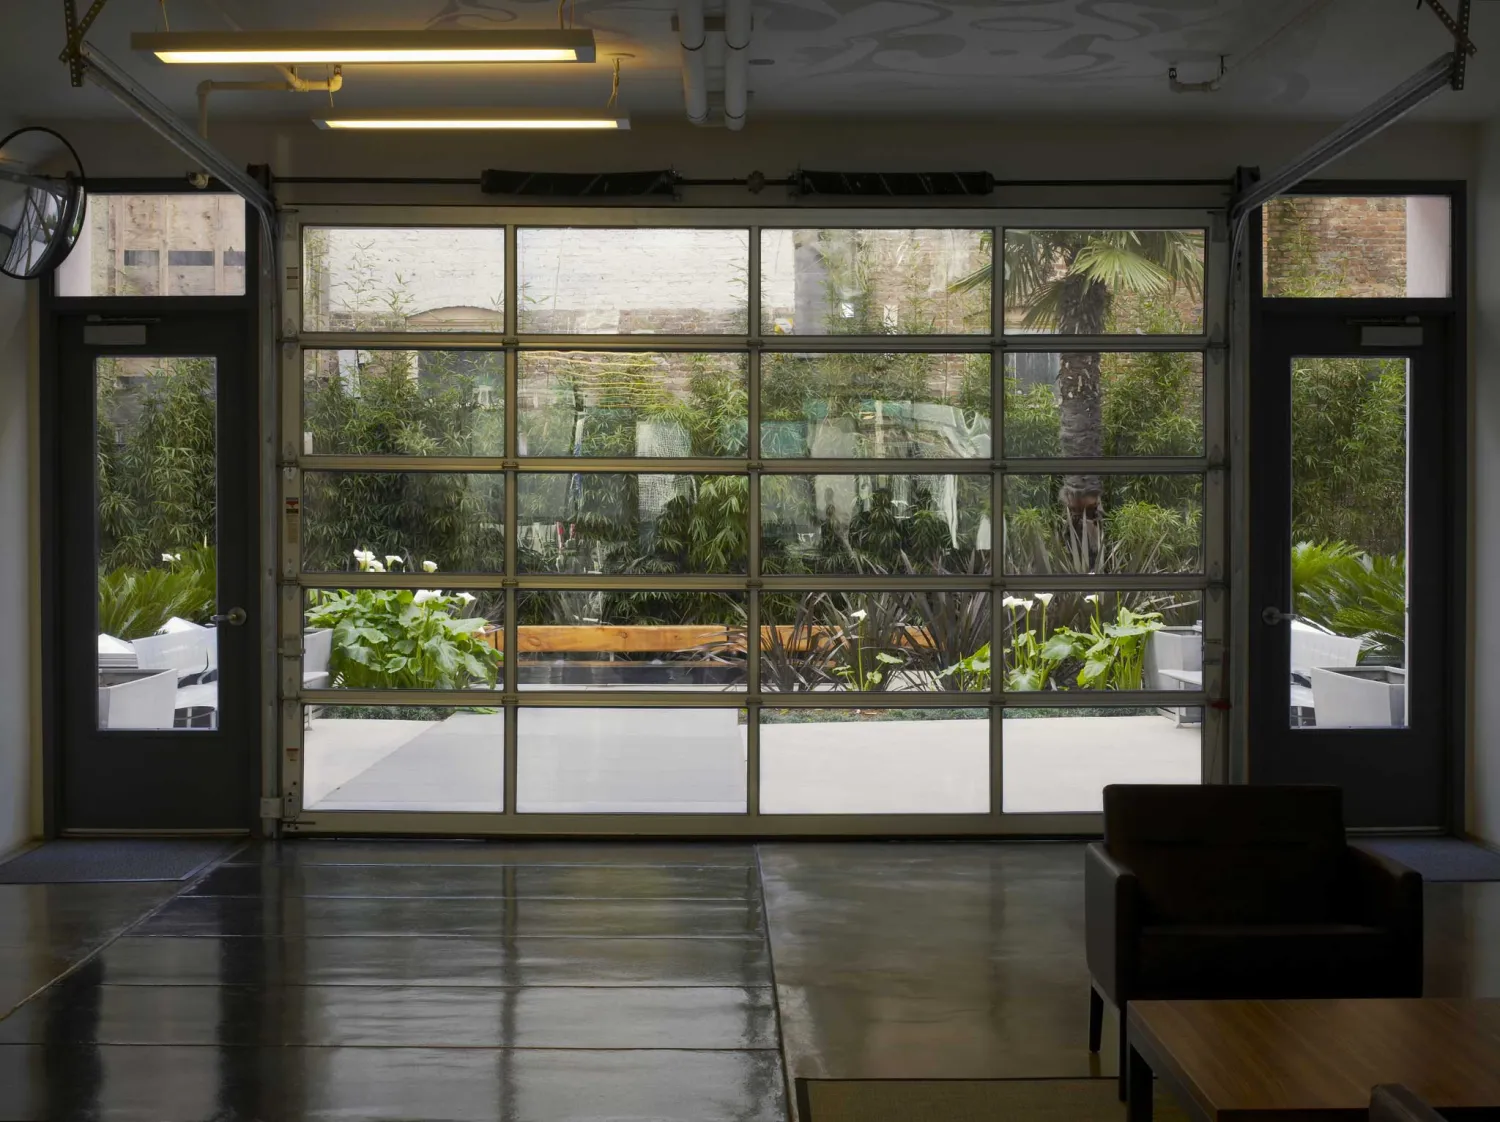 View from the lobby through a glass roll-up garage door into the planted courtyard.